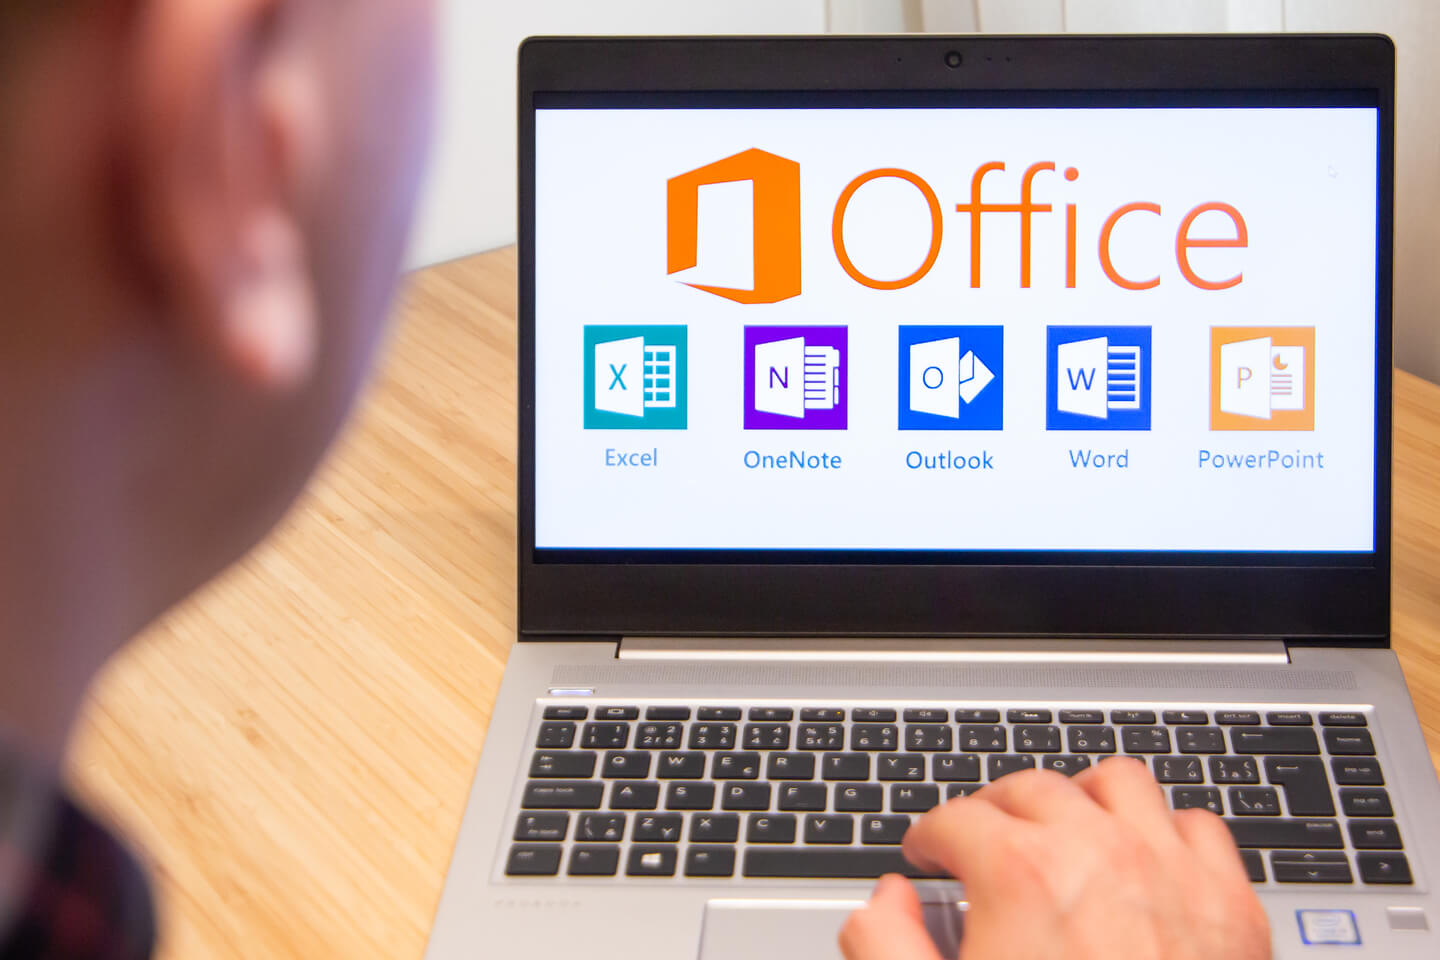 Word Extensions for Office 360 Help Improve Business Productivity